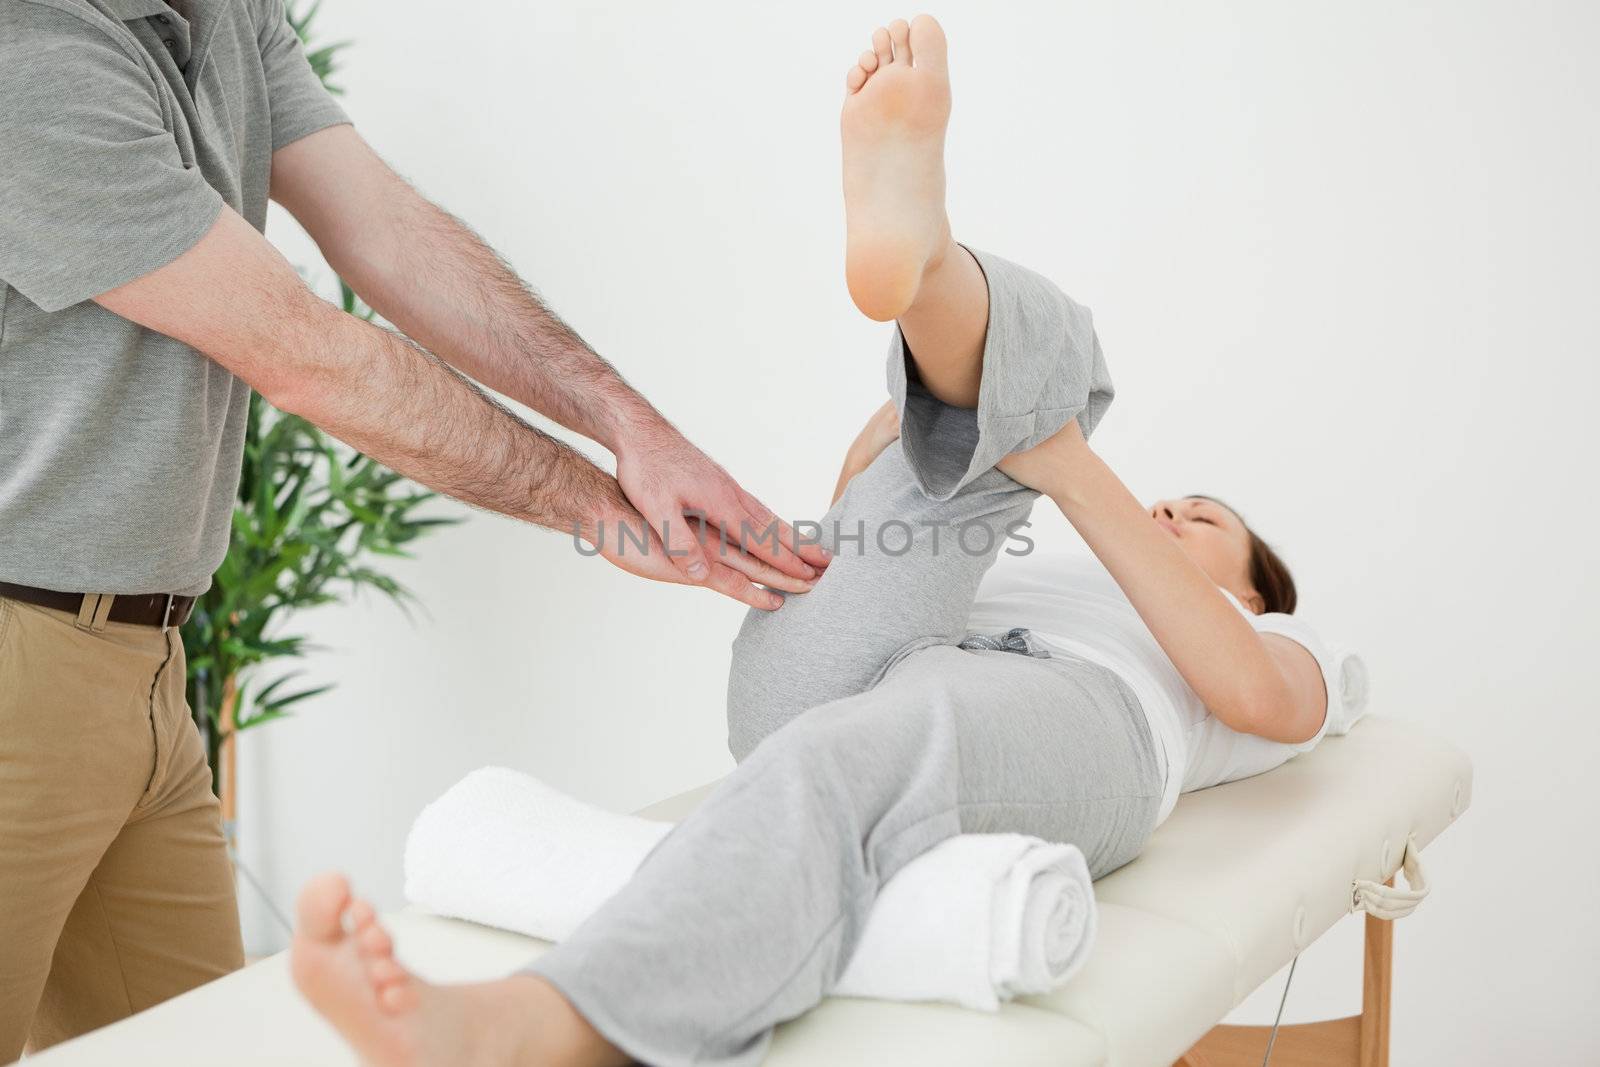 Woman stretching her leg while a man is massaging her by Wavebreakmedia